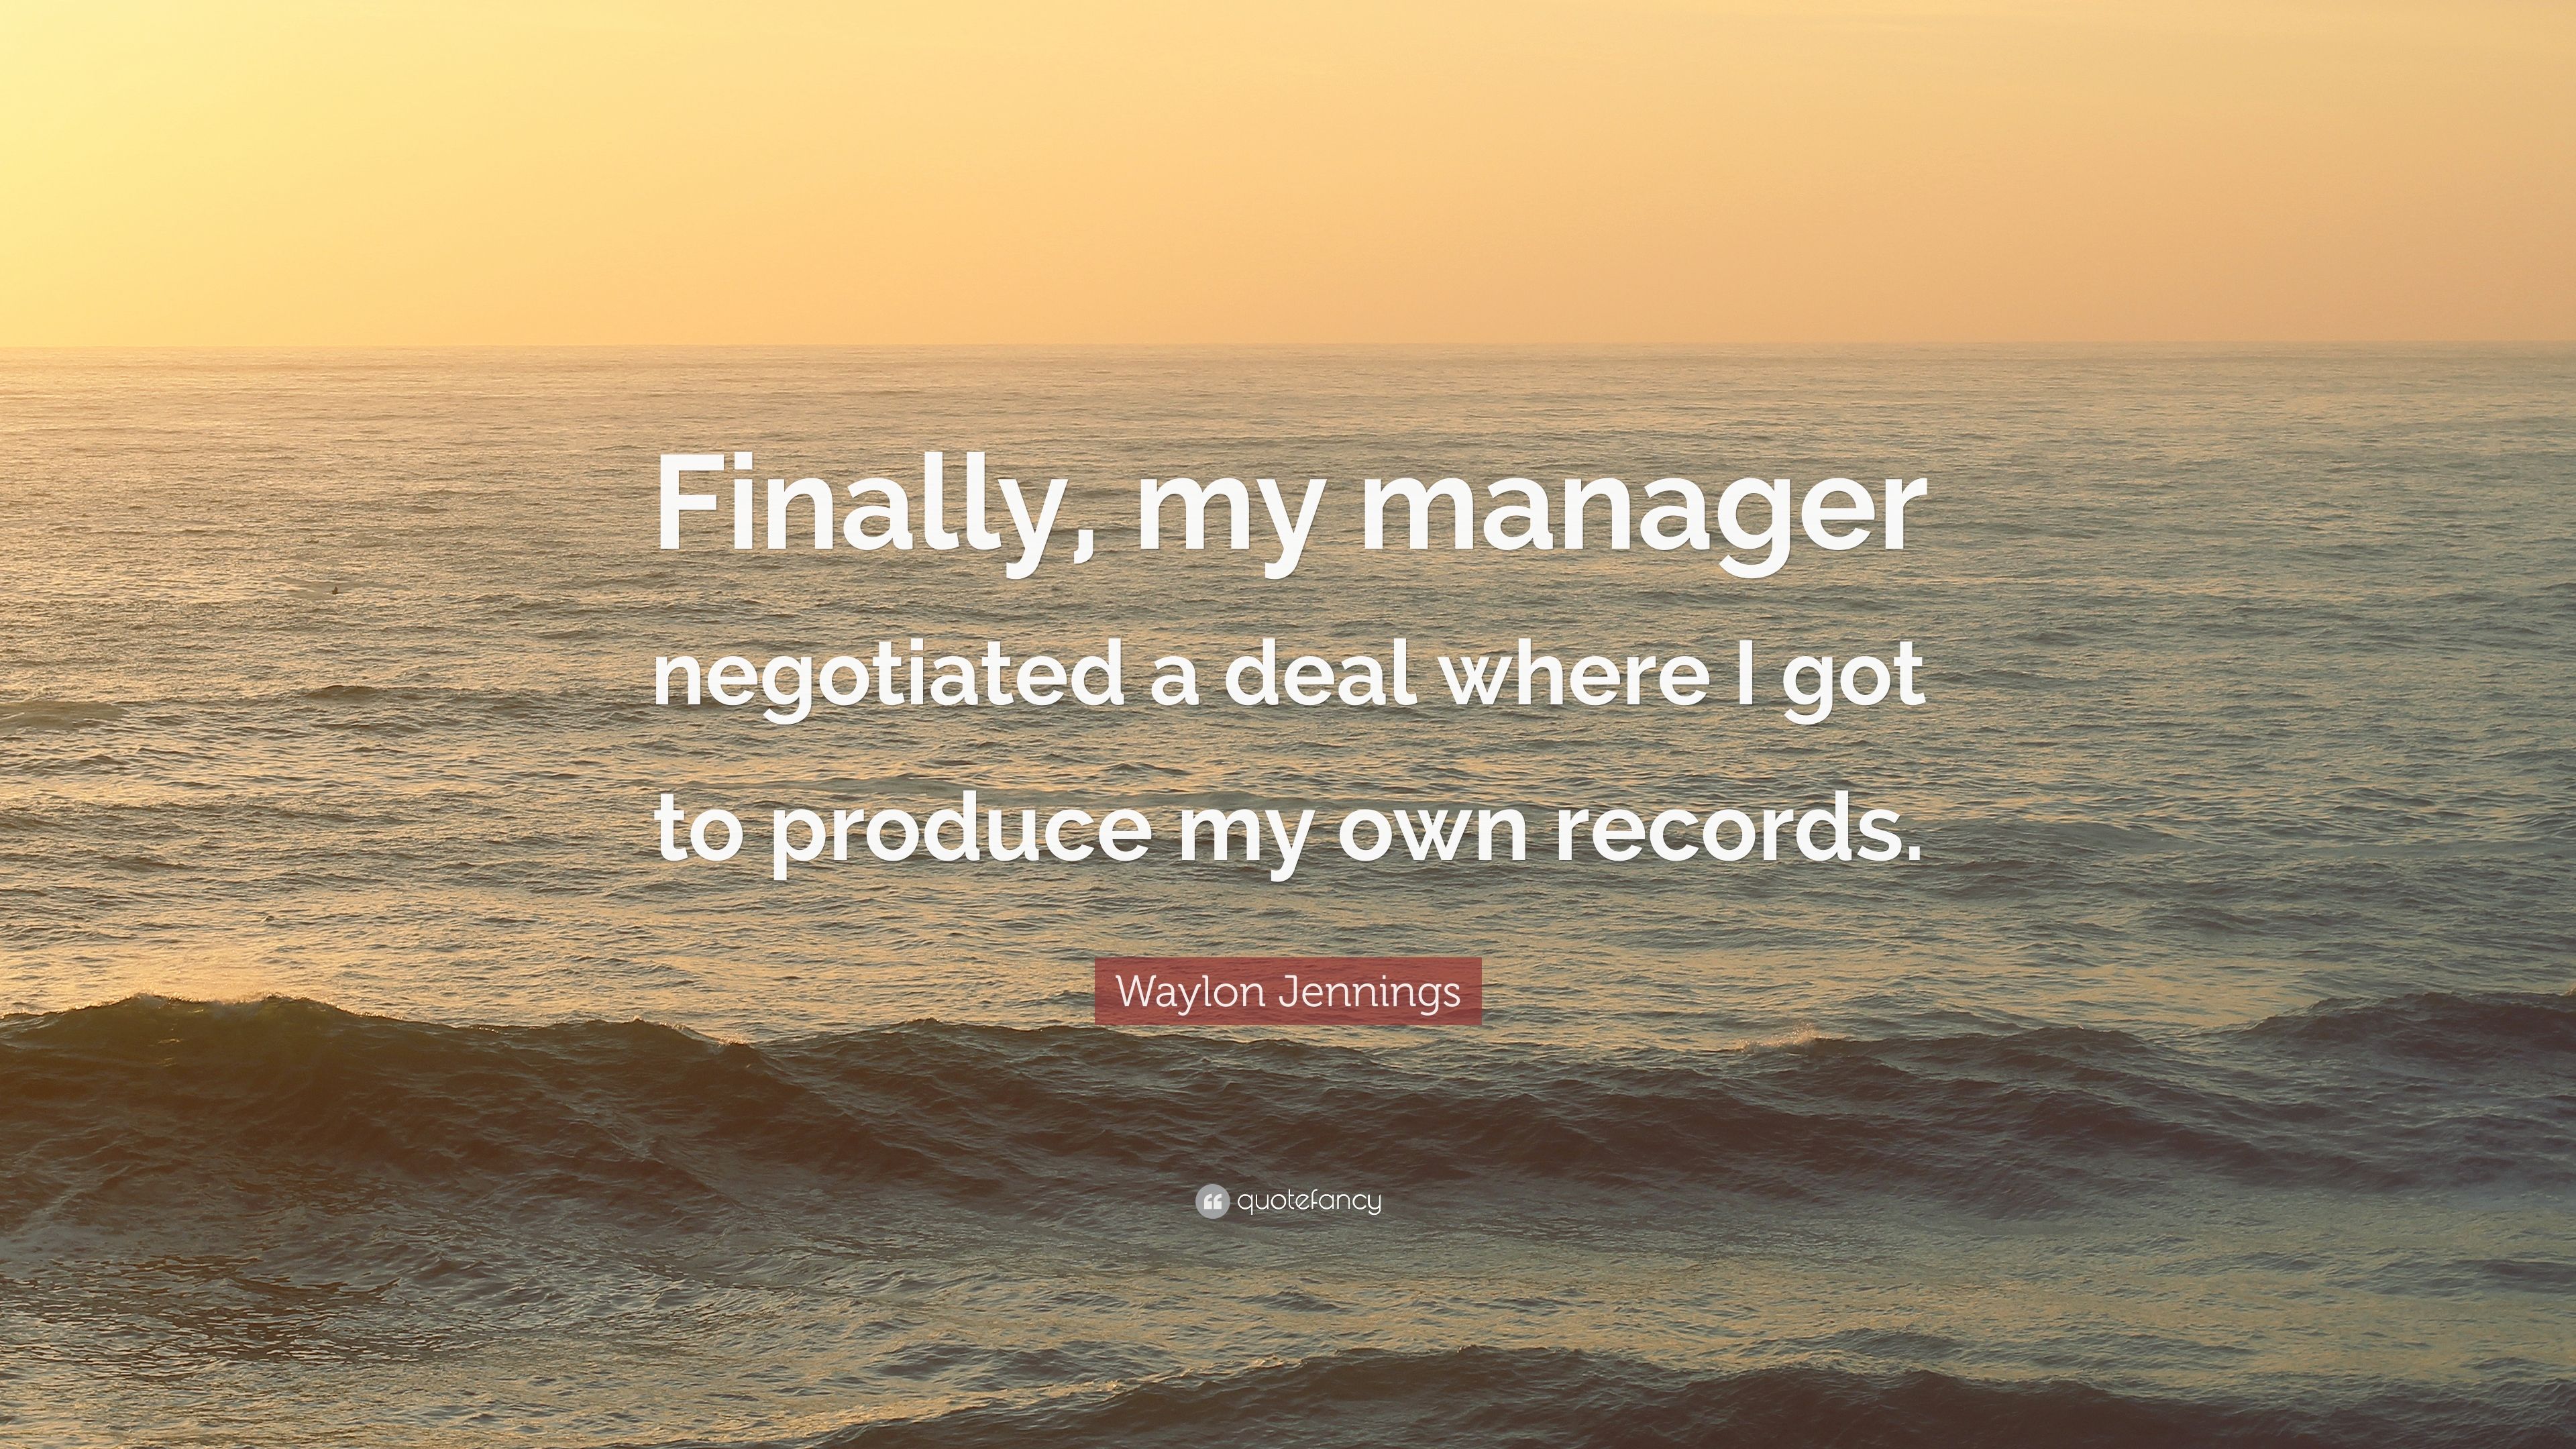 Waylon Jennings Quote: “Finally, my manager negotiated a deal where